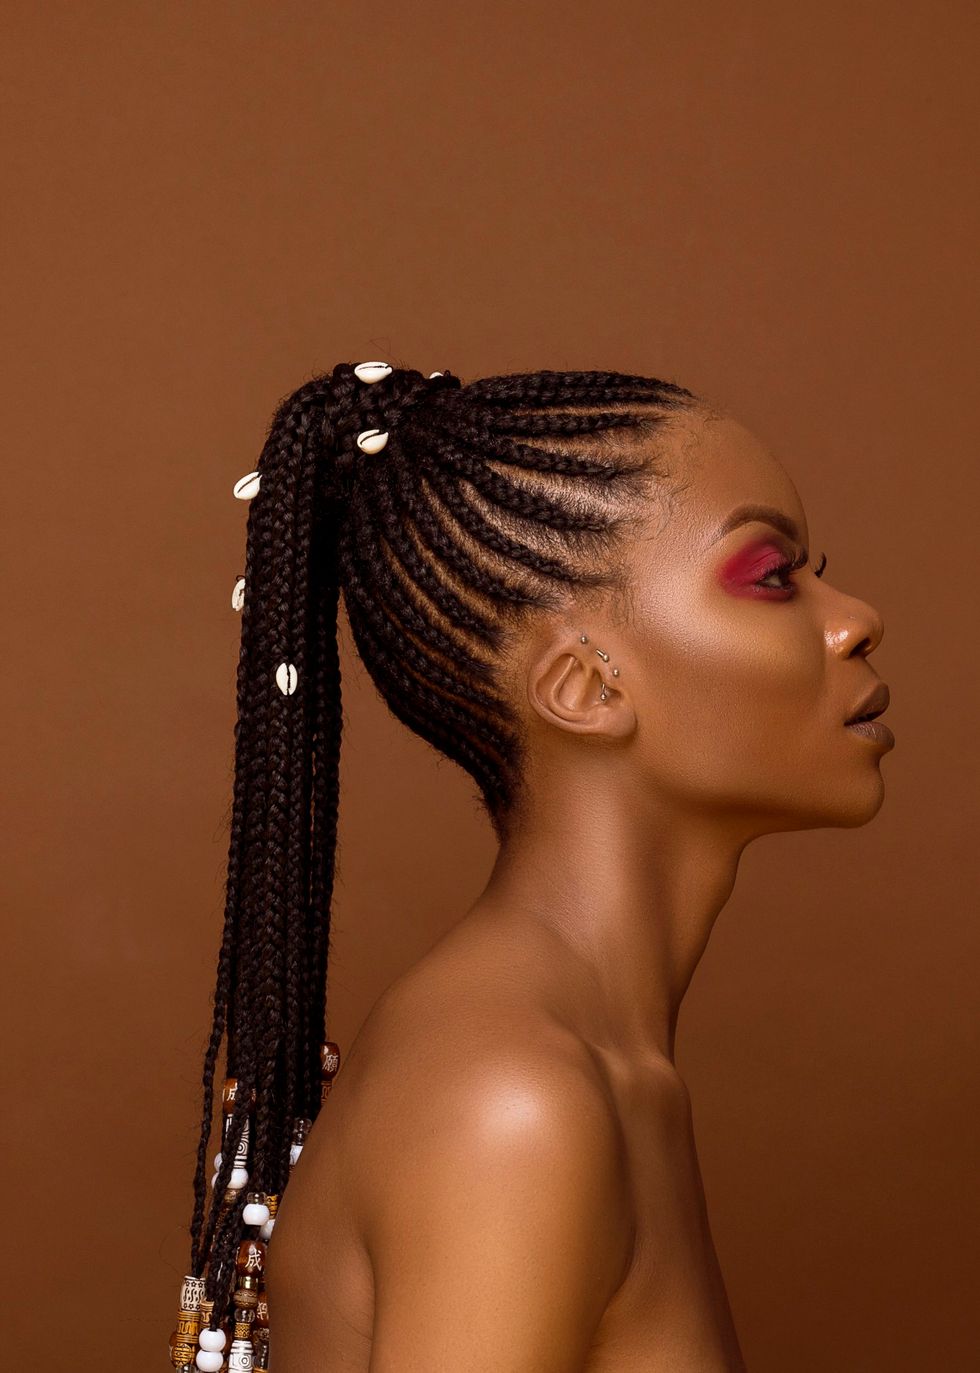 This Stunning Photo Series Draws Inspiration From Traditional Braids and Ghana's Krobo Beads